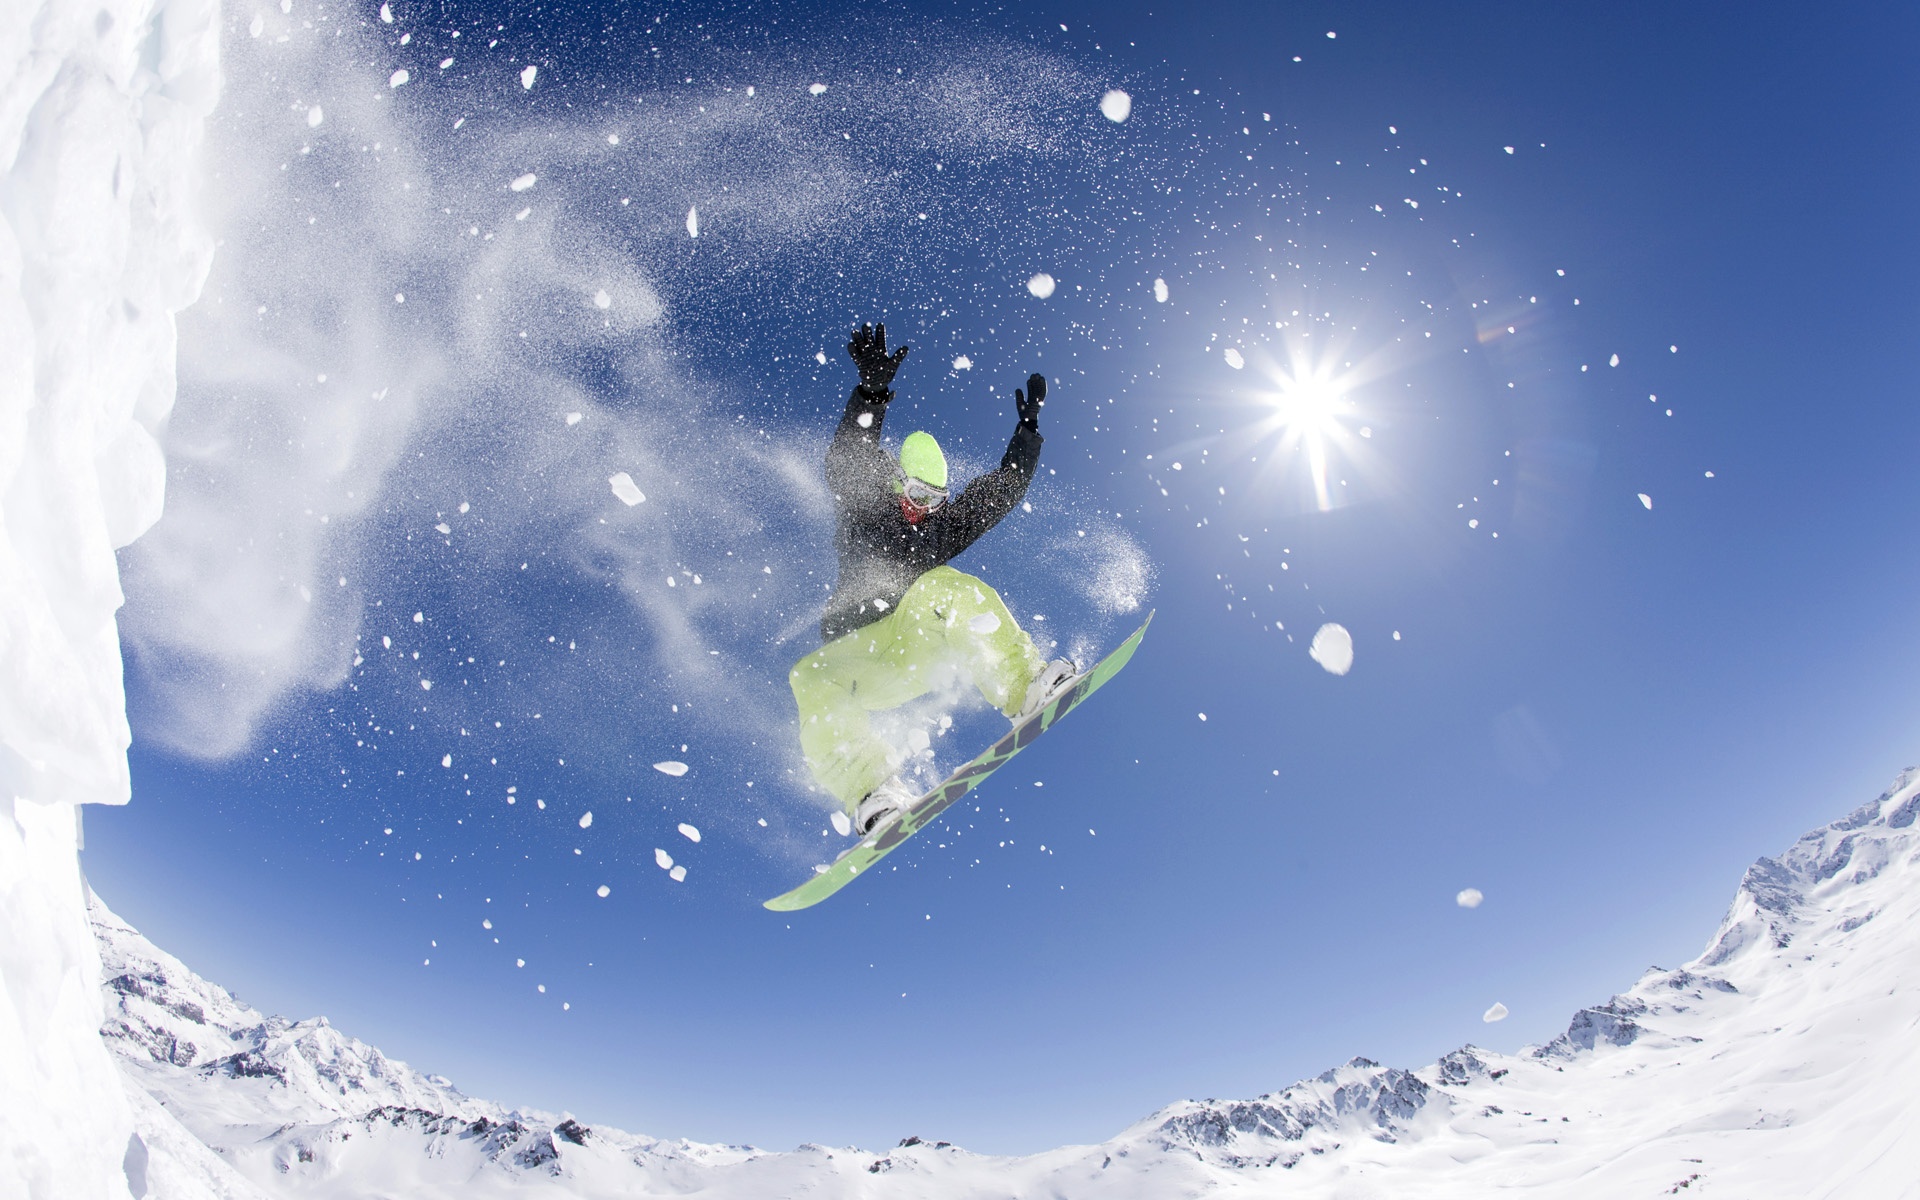 64 Snowboarding HD Wallpapers | Backgrounds - Wallpaper Abyss - Page 2